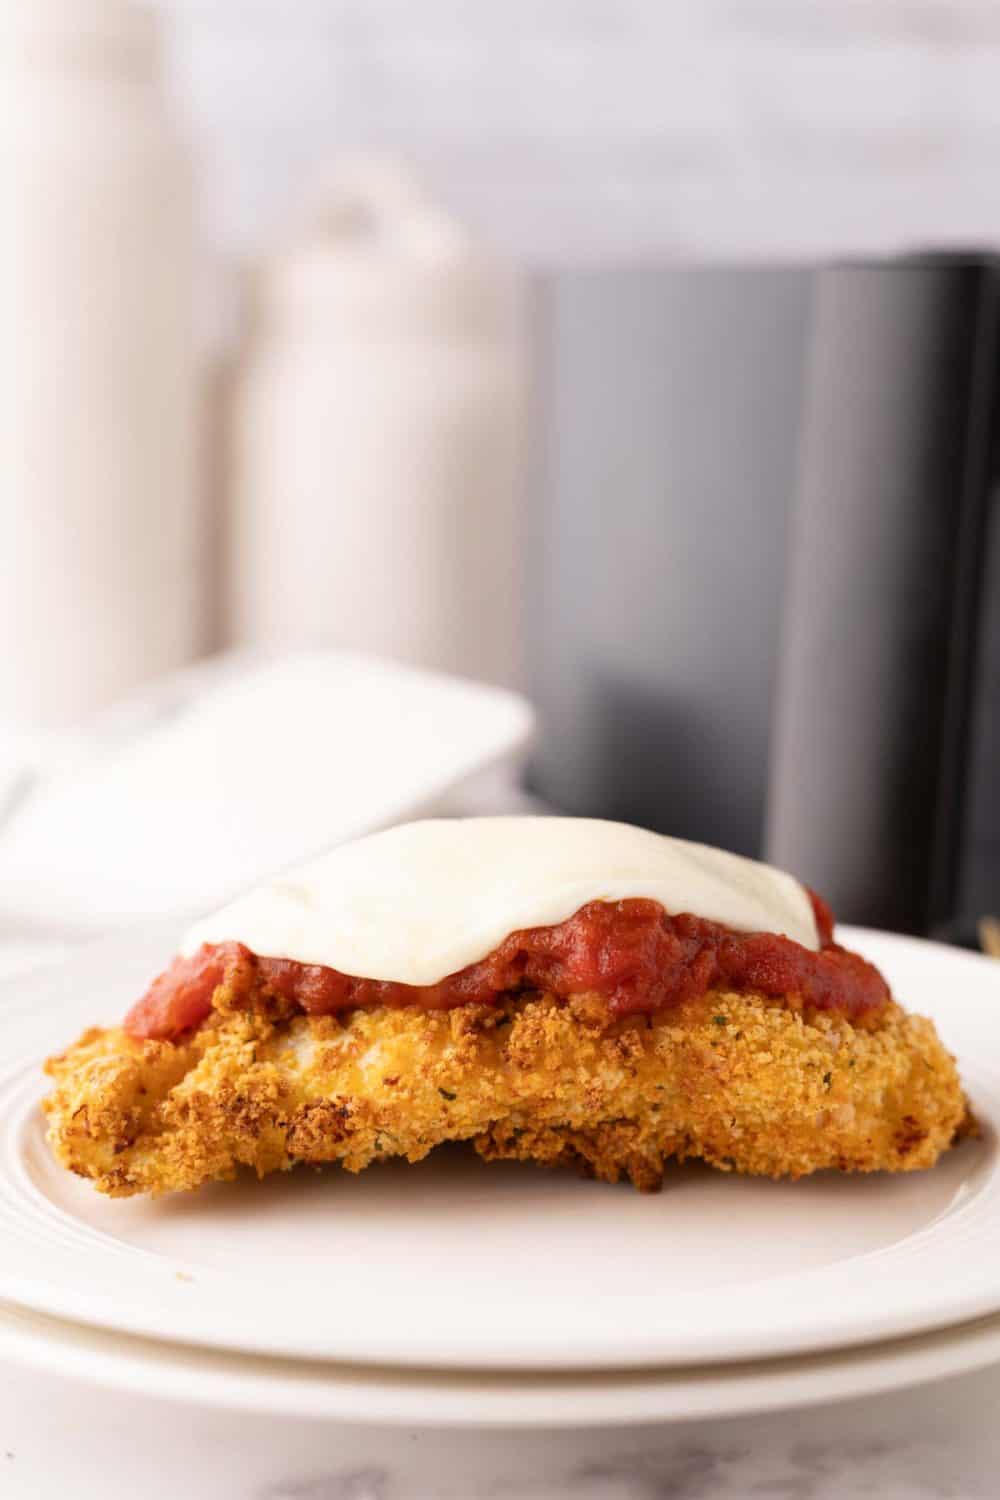 crispy air fried chicken parmesan with red sauce and melted mozzarella on a white plate.